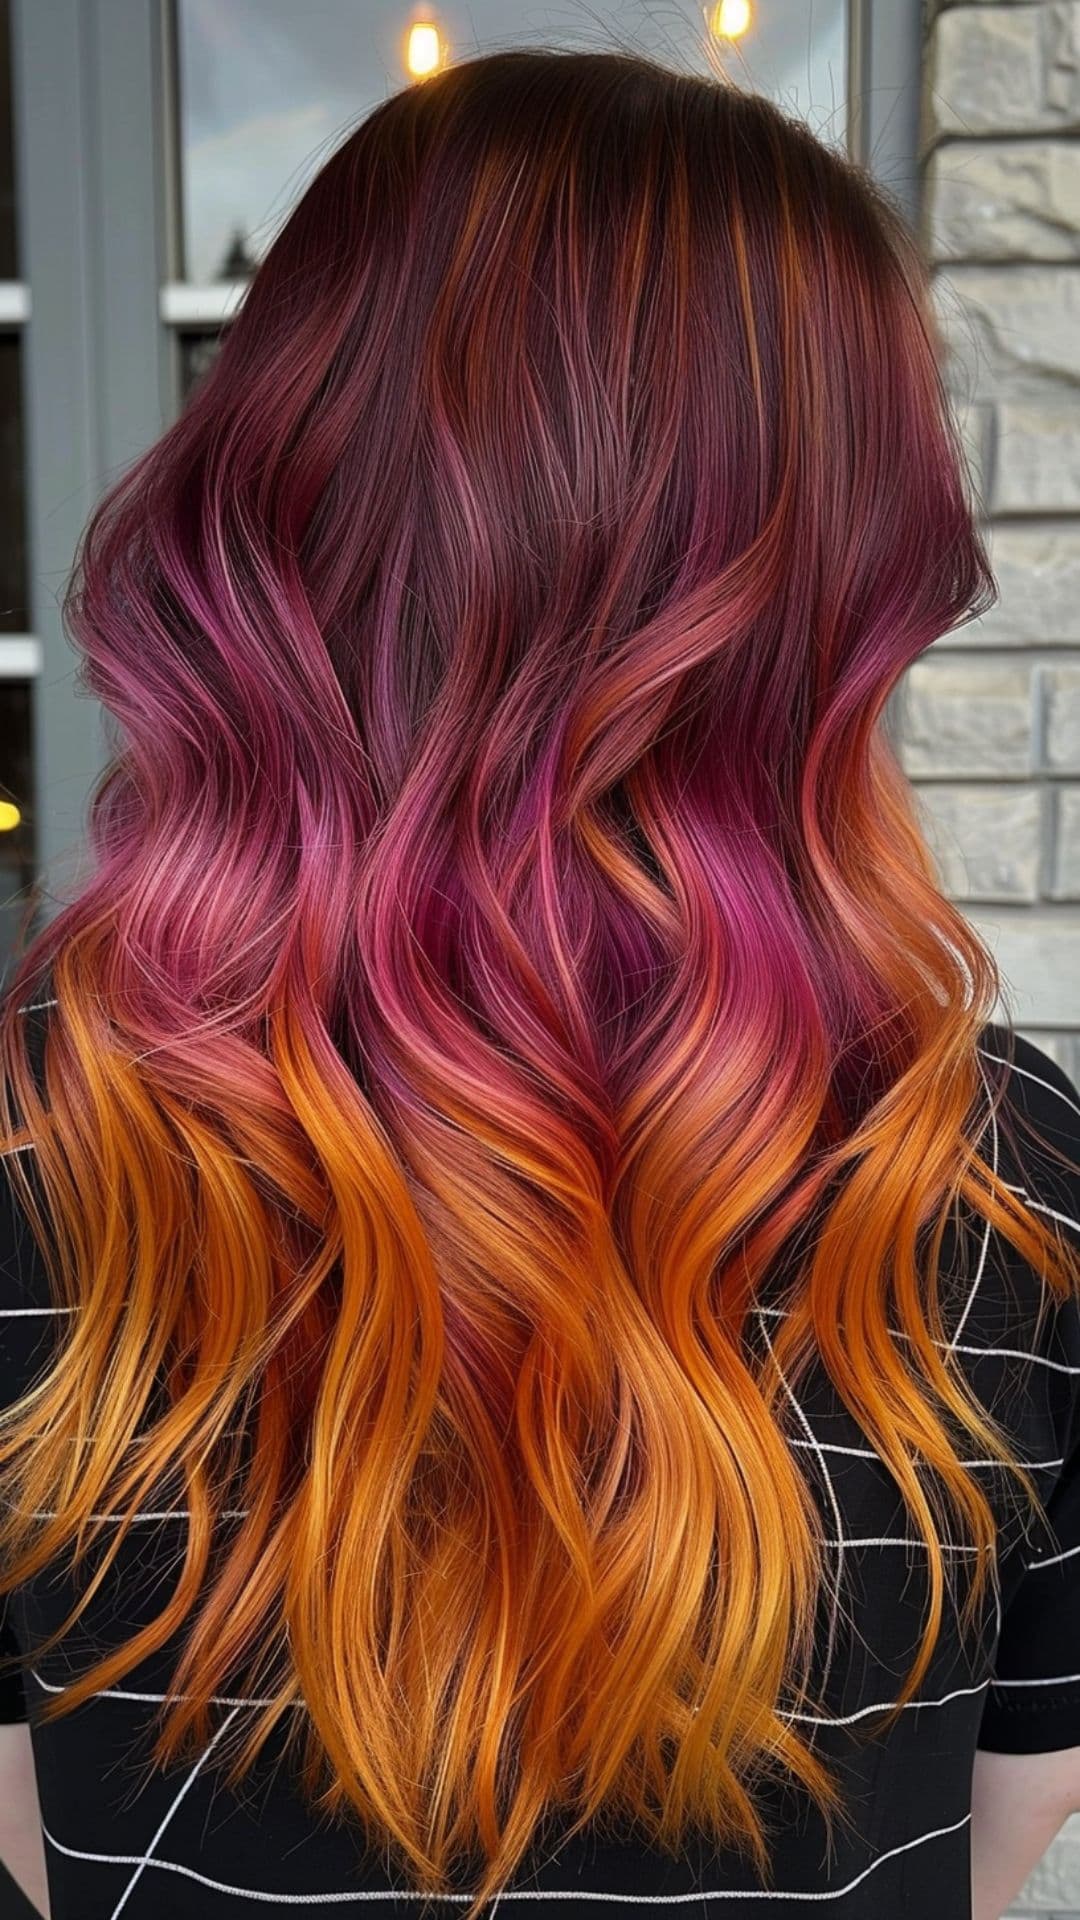 A woman modelling a sunset ombre hair.